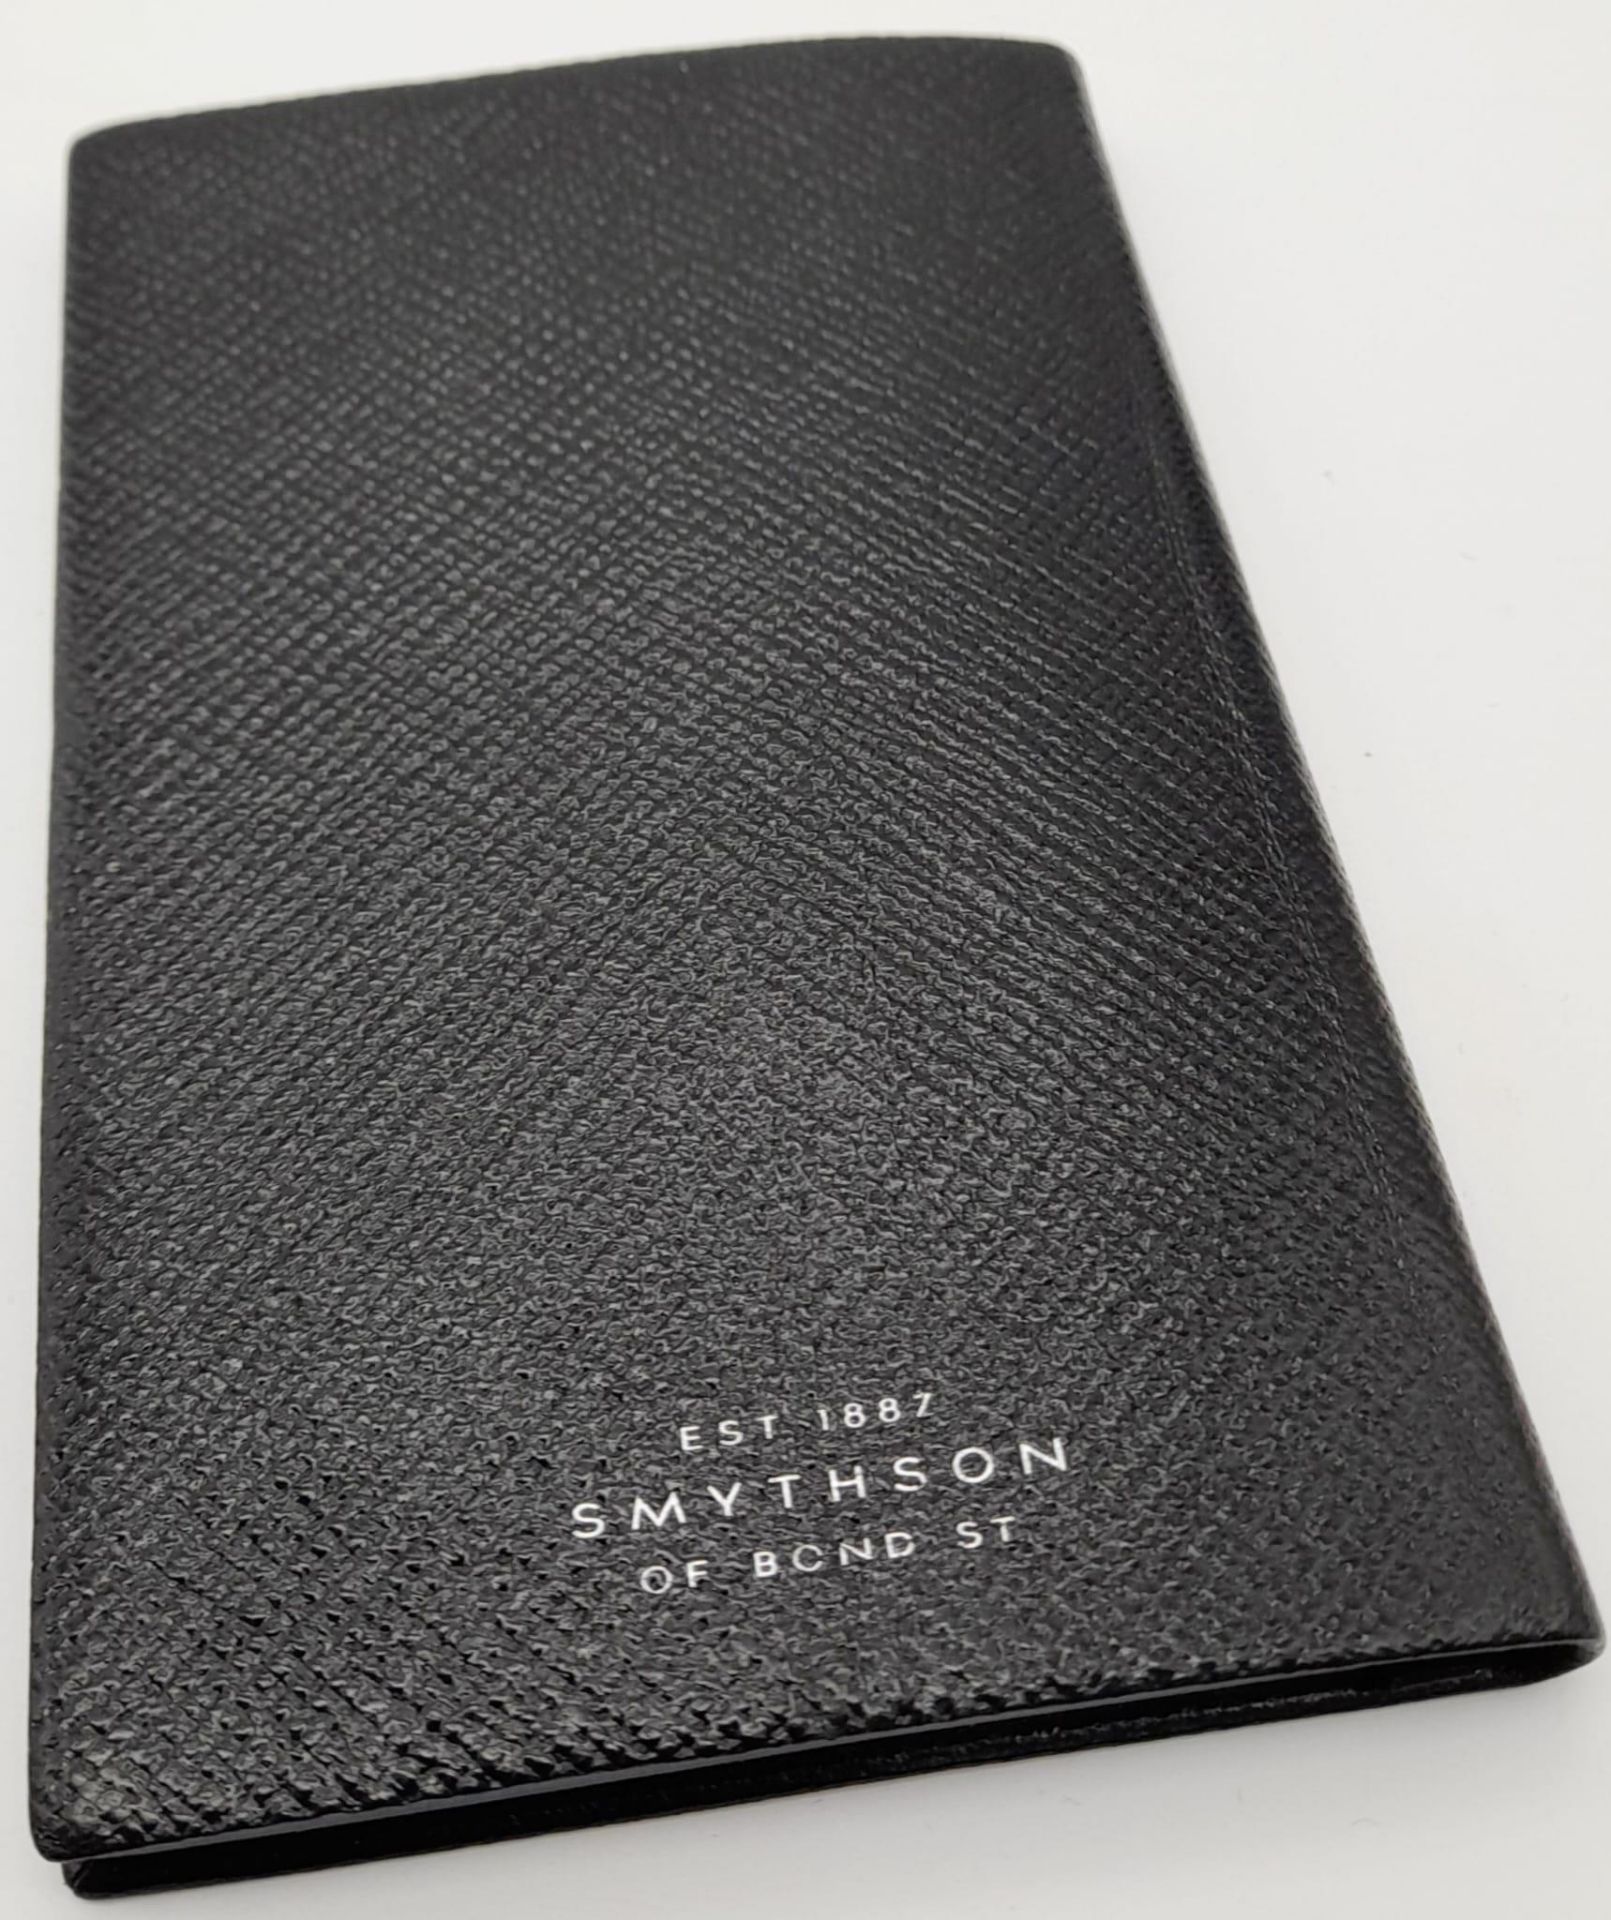 ZENITH WATCH COMPANY LEATHER NOTEBOOK MADE BY SMYTHSON OF BOND STREET LONDON - Image 4 of 4